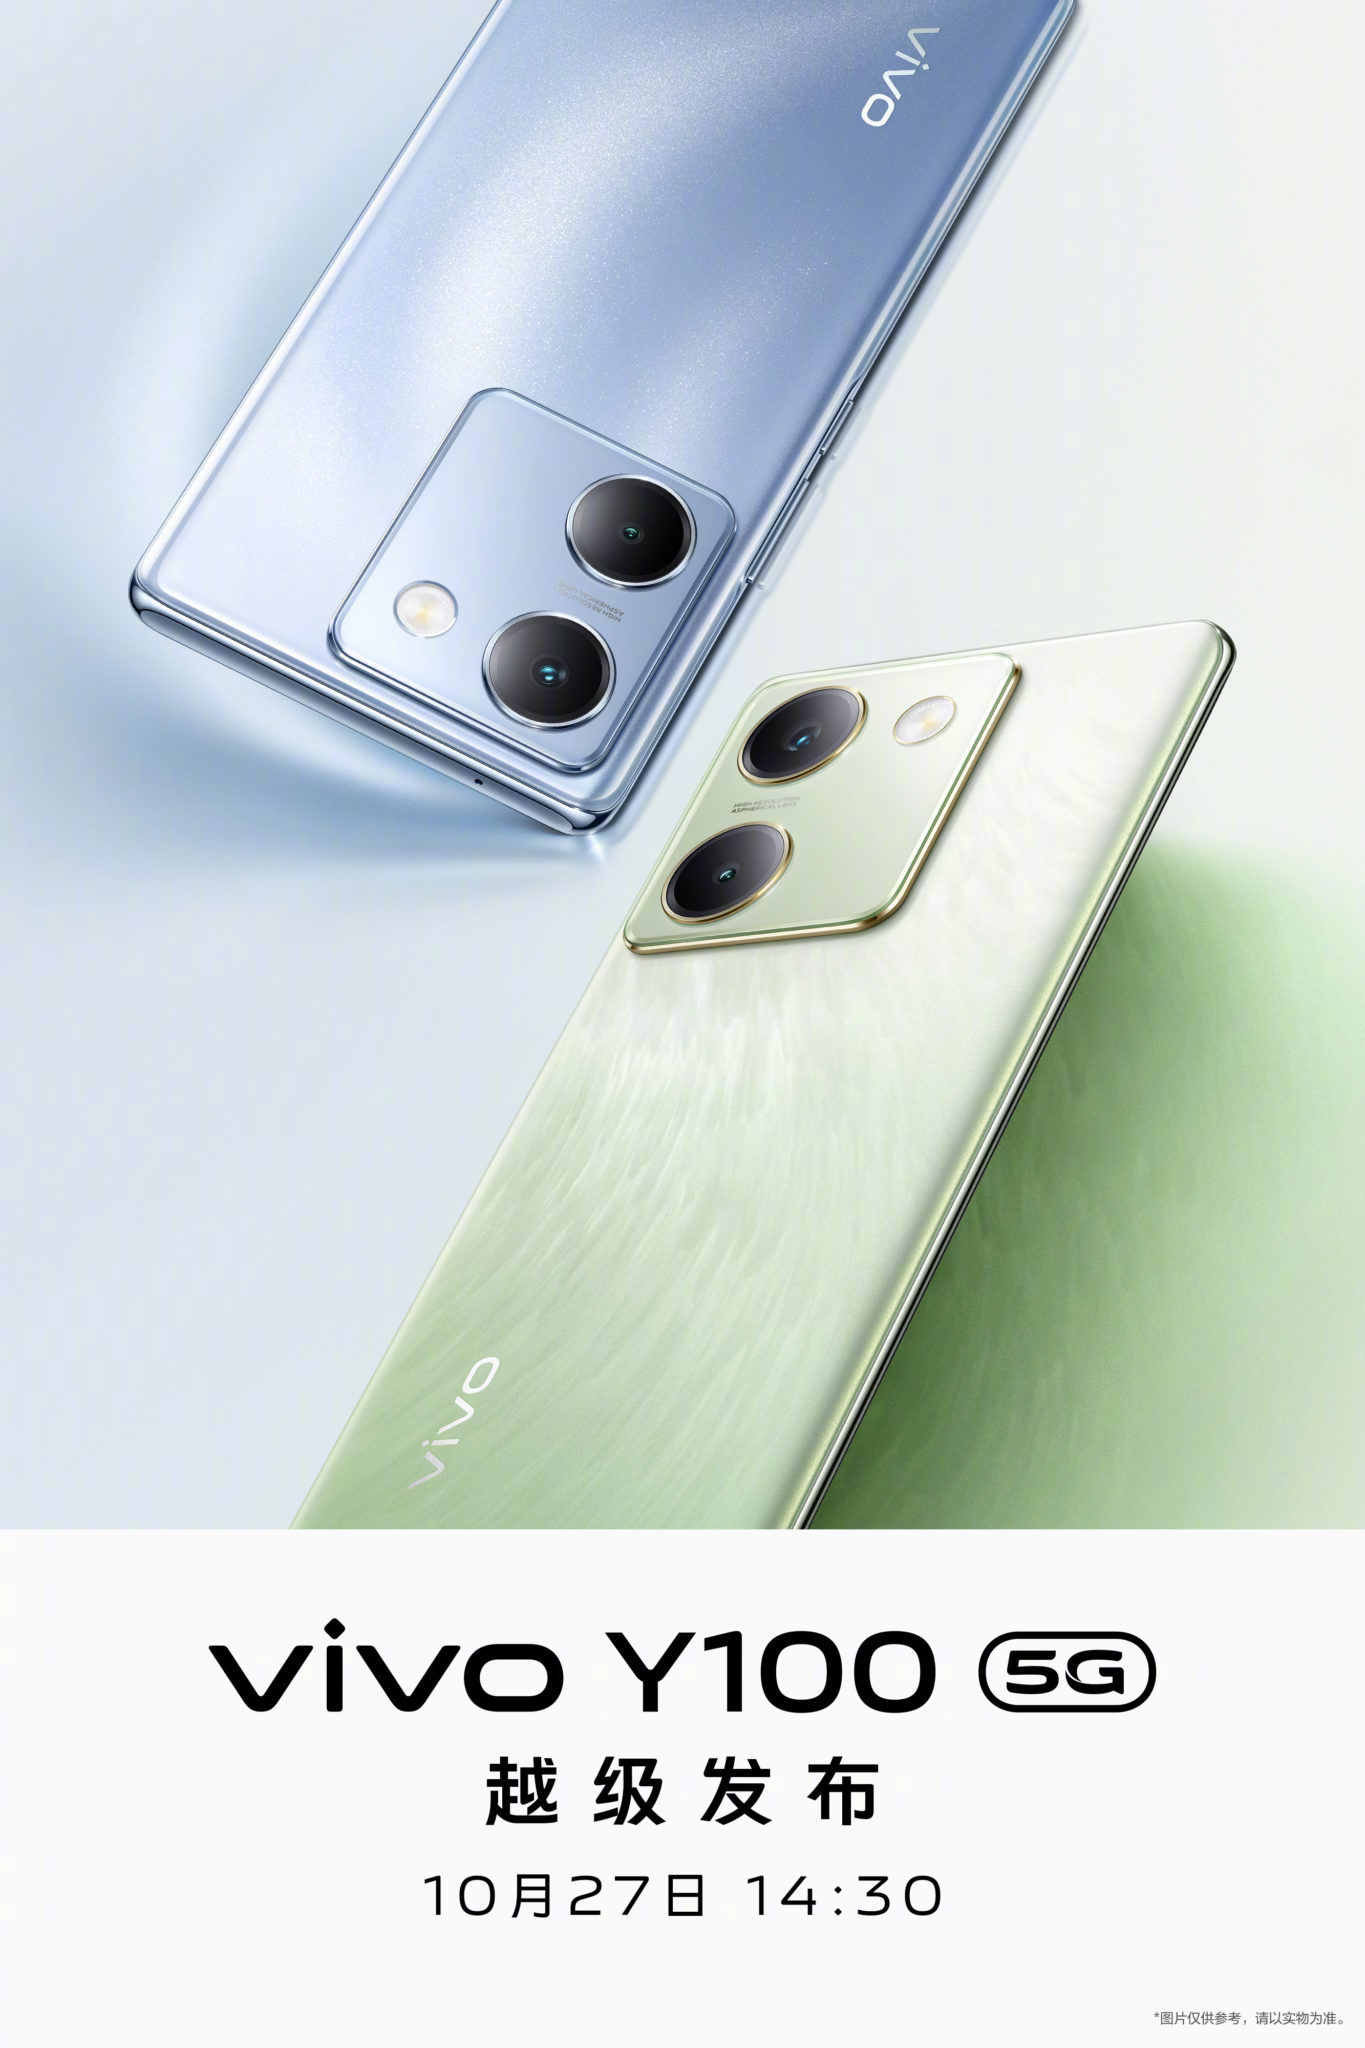 Vivo X100 Pro color options revealed ahead of launch - Playfuldroid!